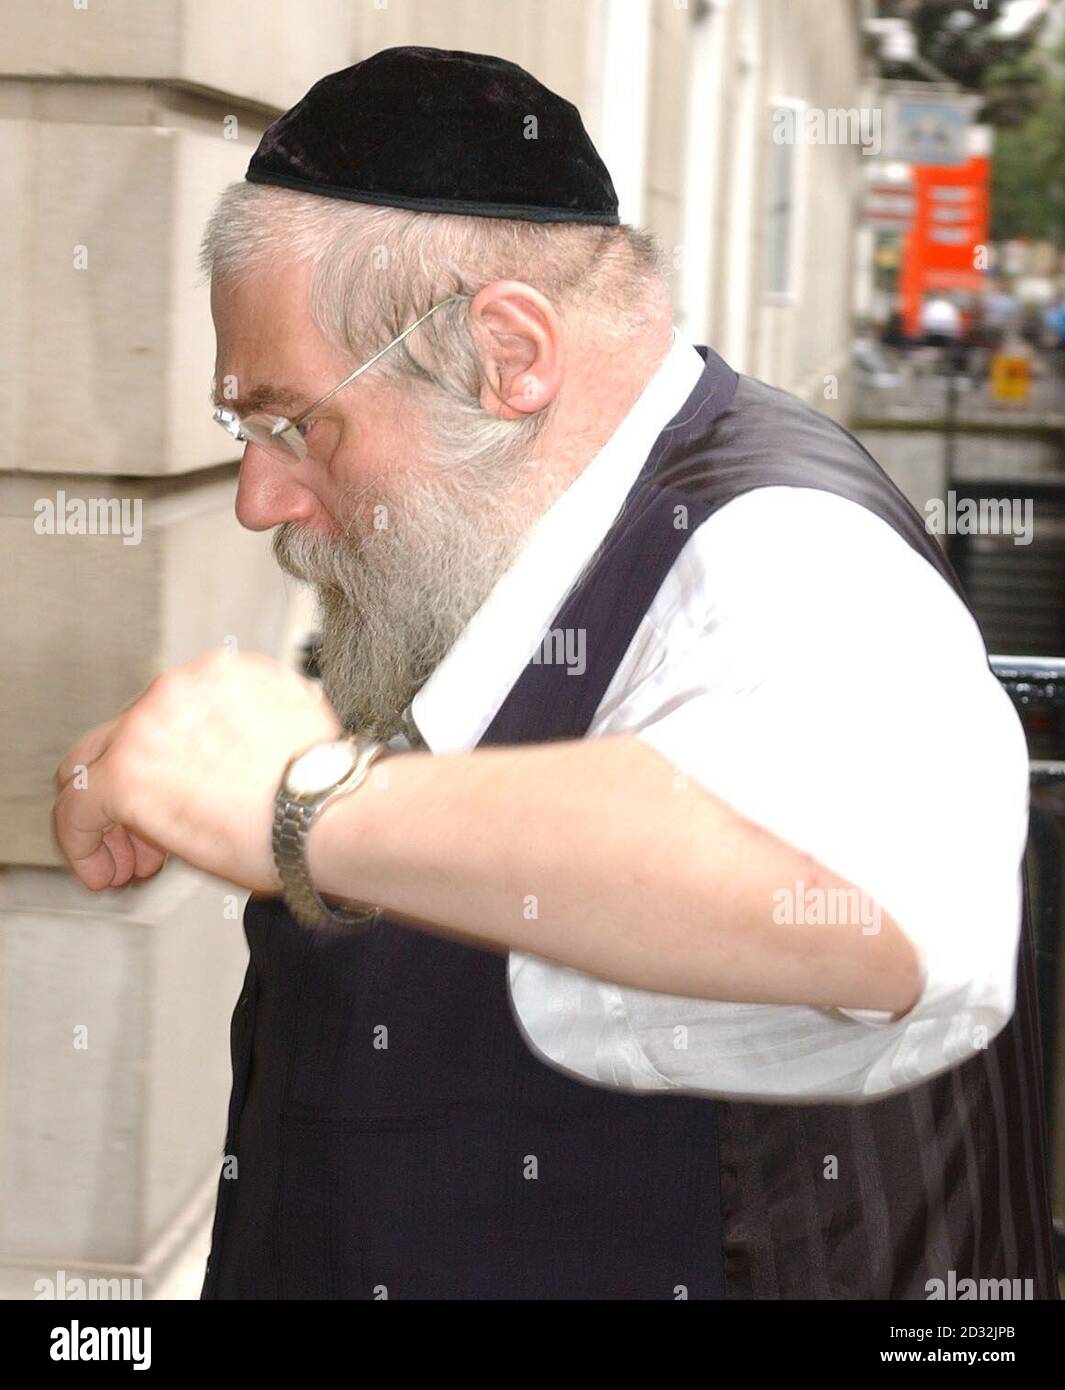 Nachman Reich, of Reich's Caterers in Golders Green,  leaves the Employment Tribunal Court in Woburn Place, London.  An Arab Muslim was sacked from his job as a cook at a kosher caterers after  throwing food over a rabbi at a Jewish wedding.  *   an employment tribunal heard. Stock Photo